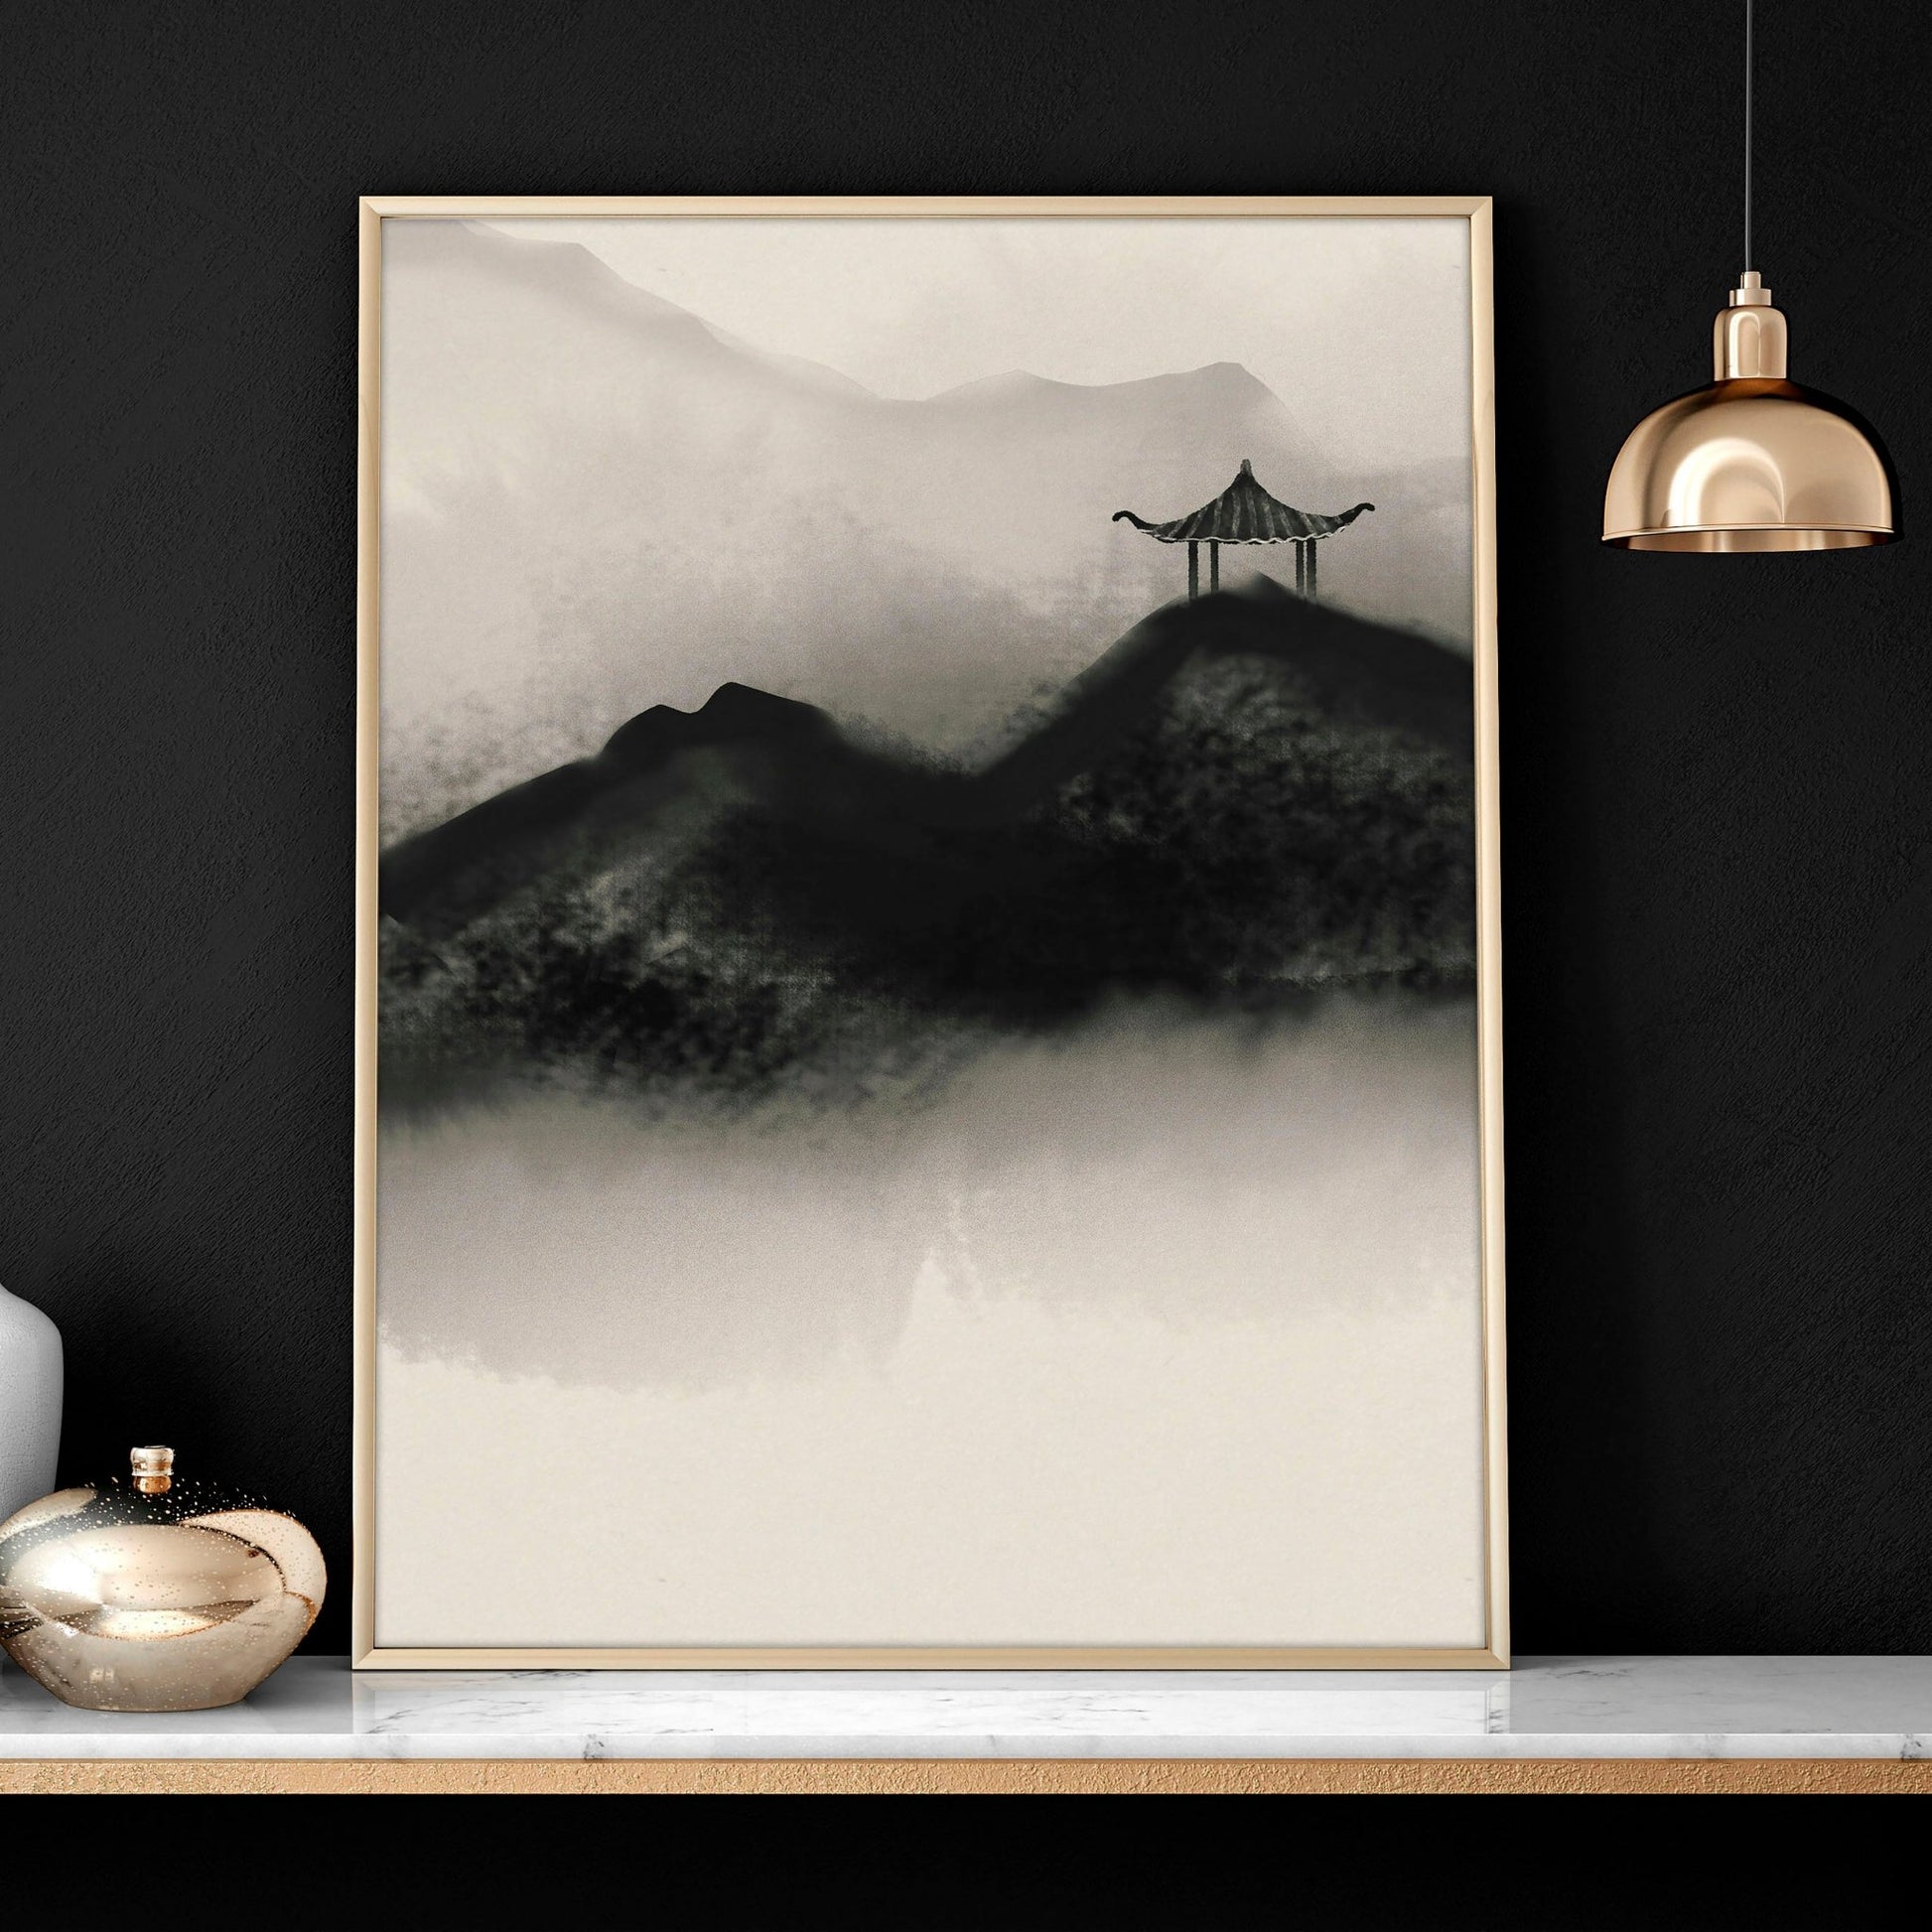 Japanese pagoda | set of 3 wall art prints for office - About Wall Art